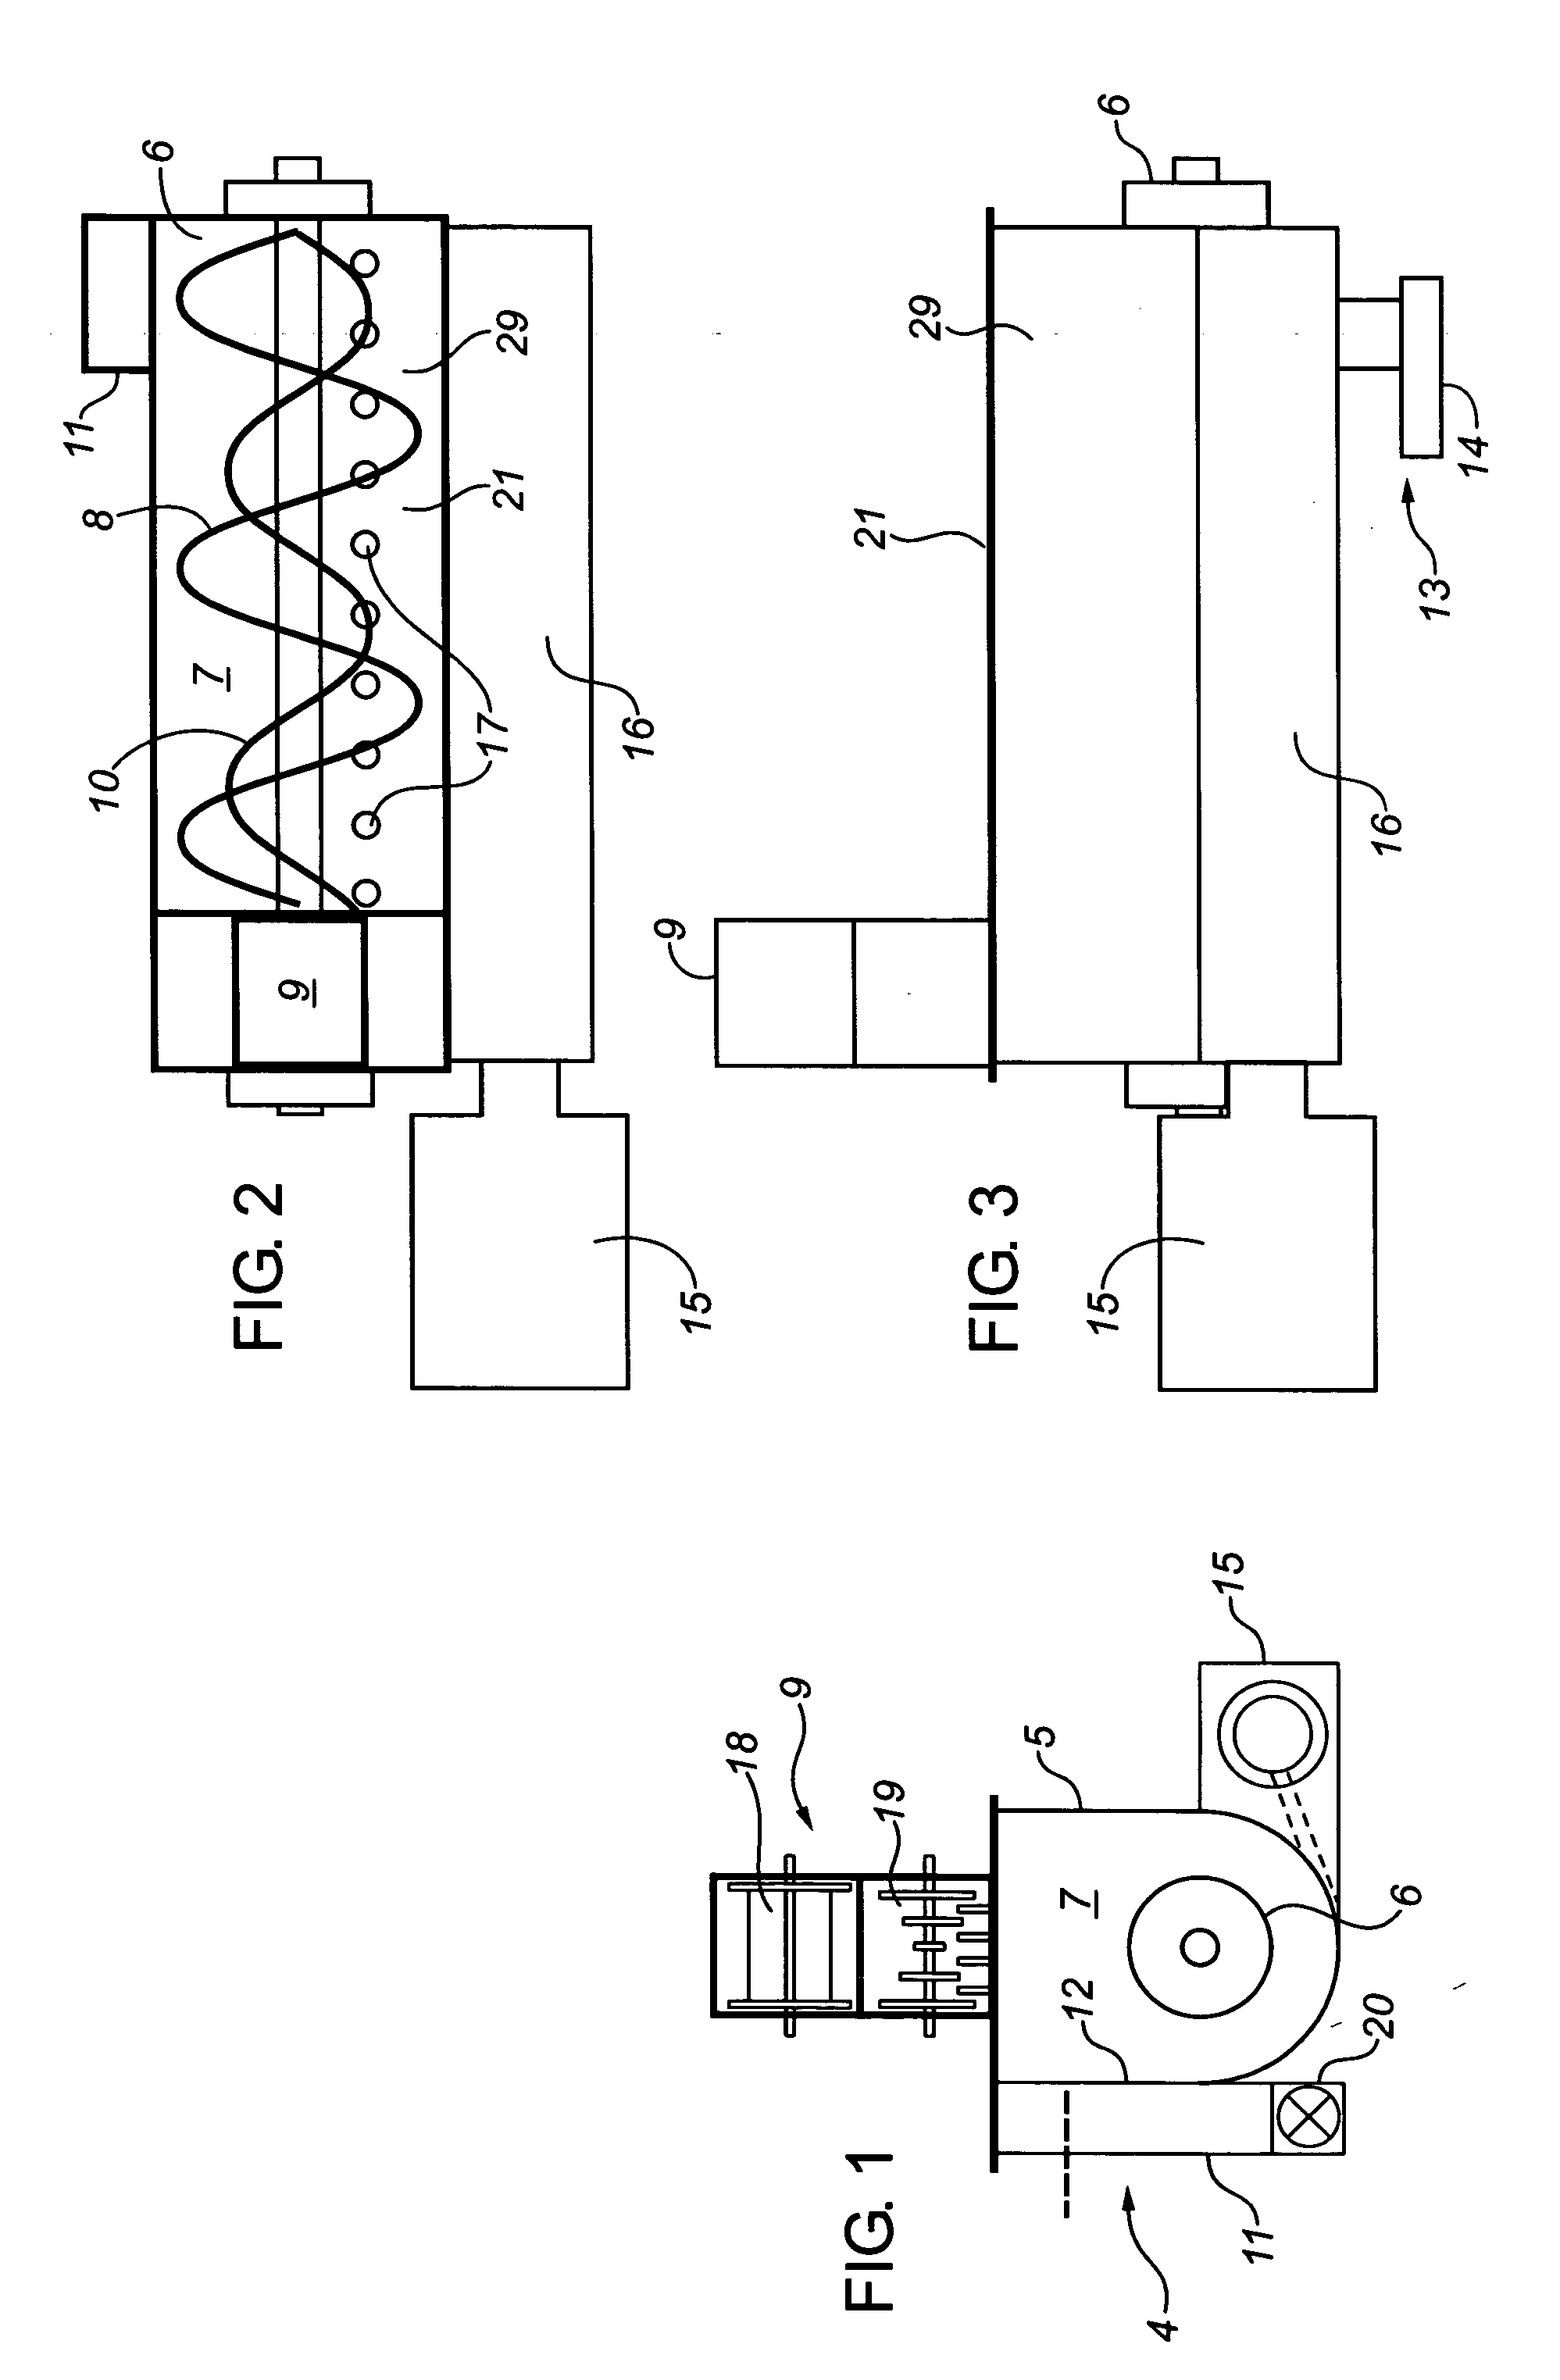 Apparatus and process for removing liquids from drill cuttings